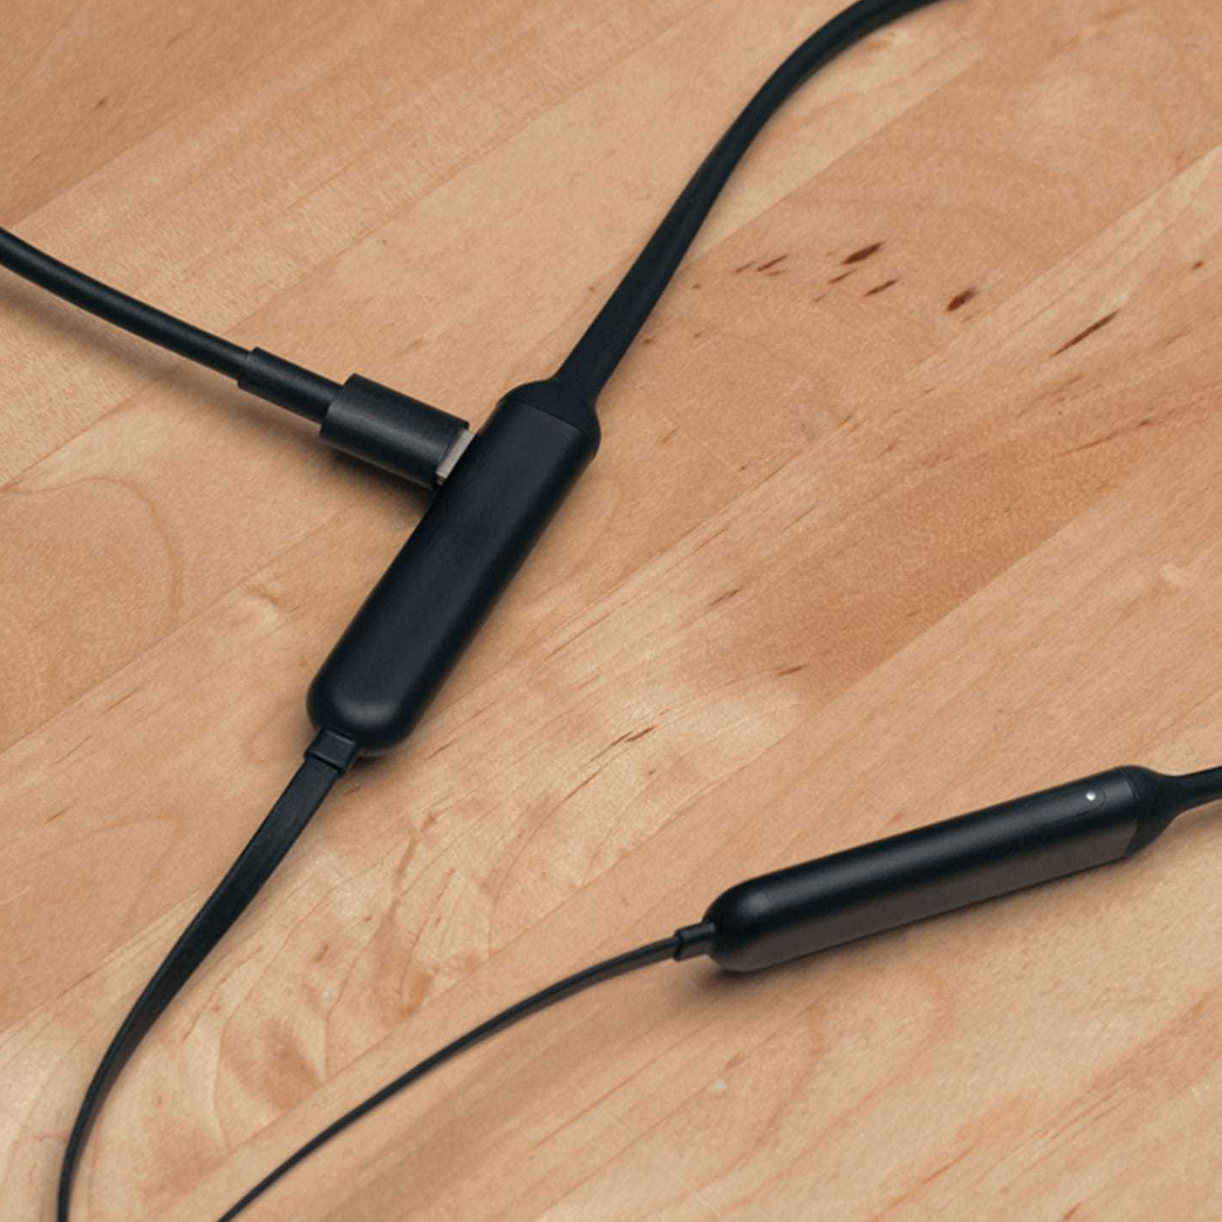 charger for beats x wireless headphones